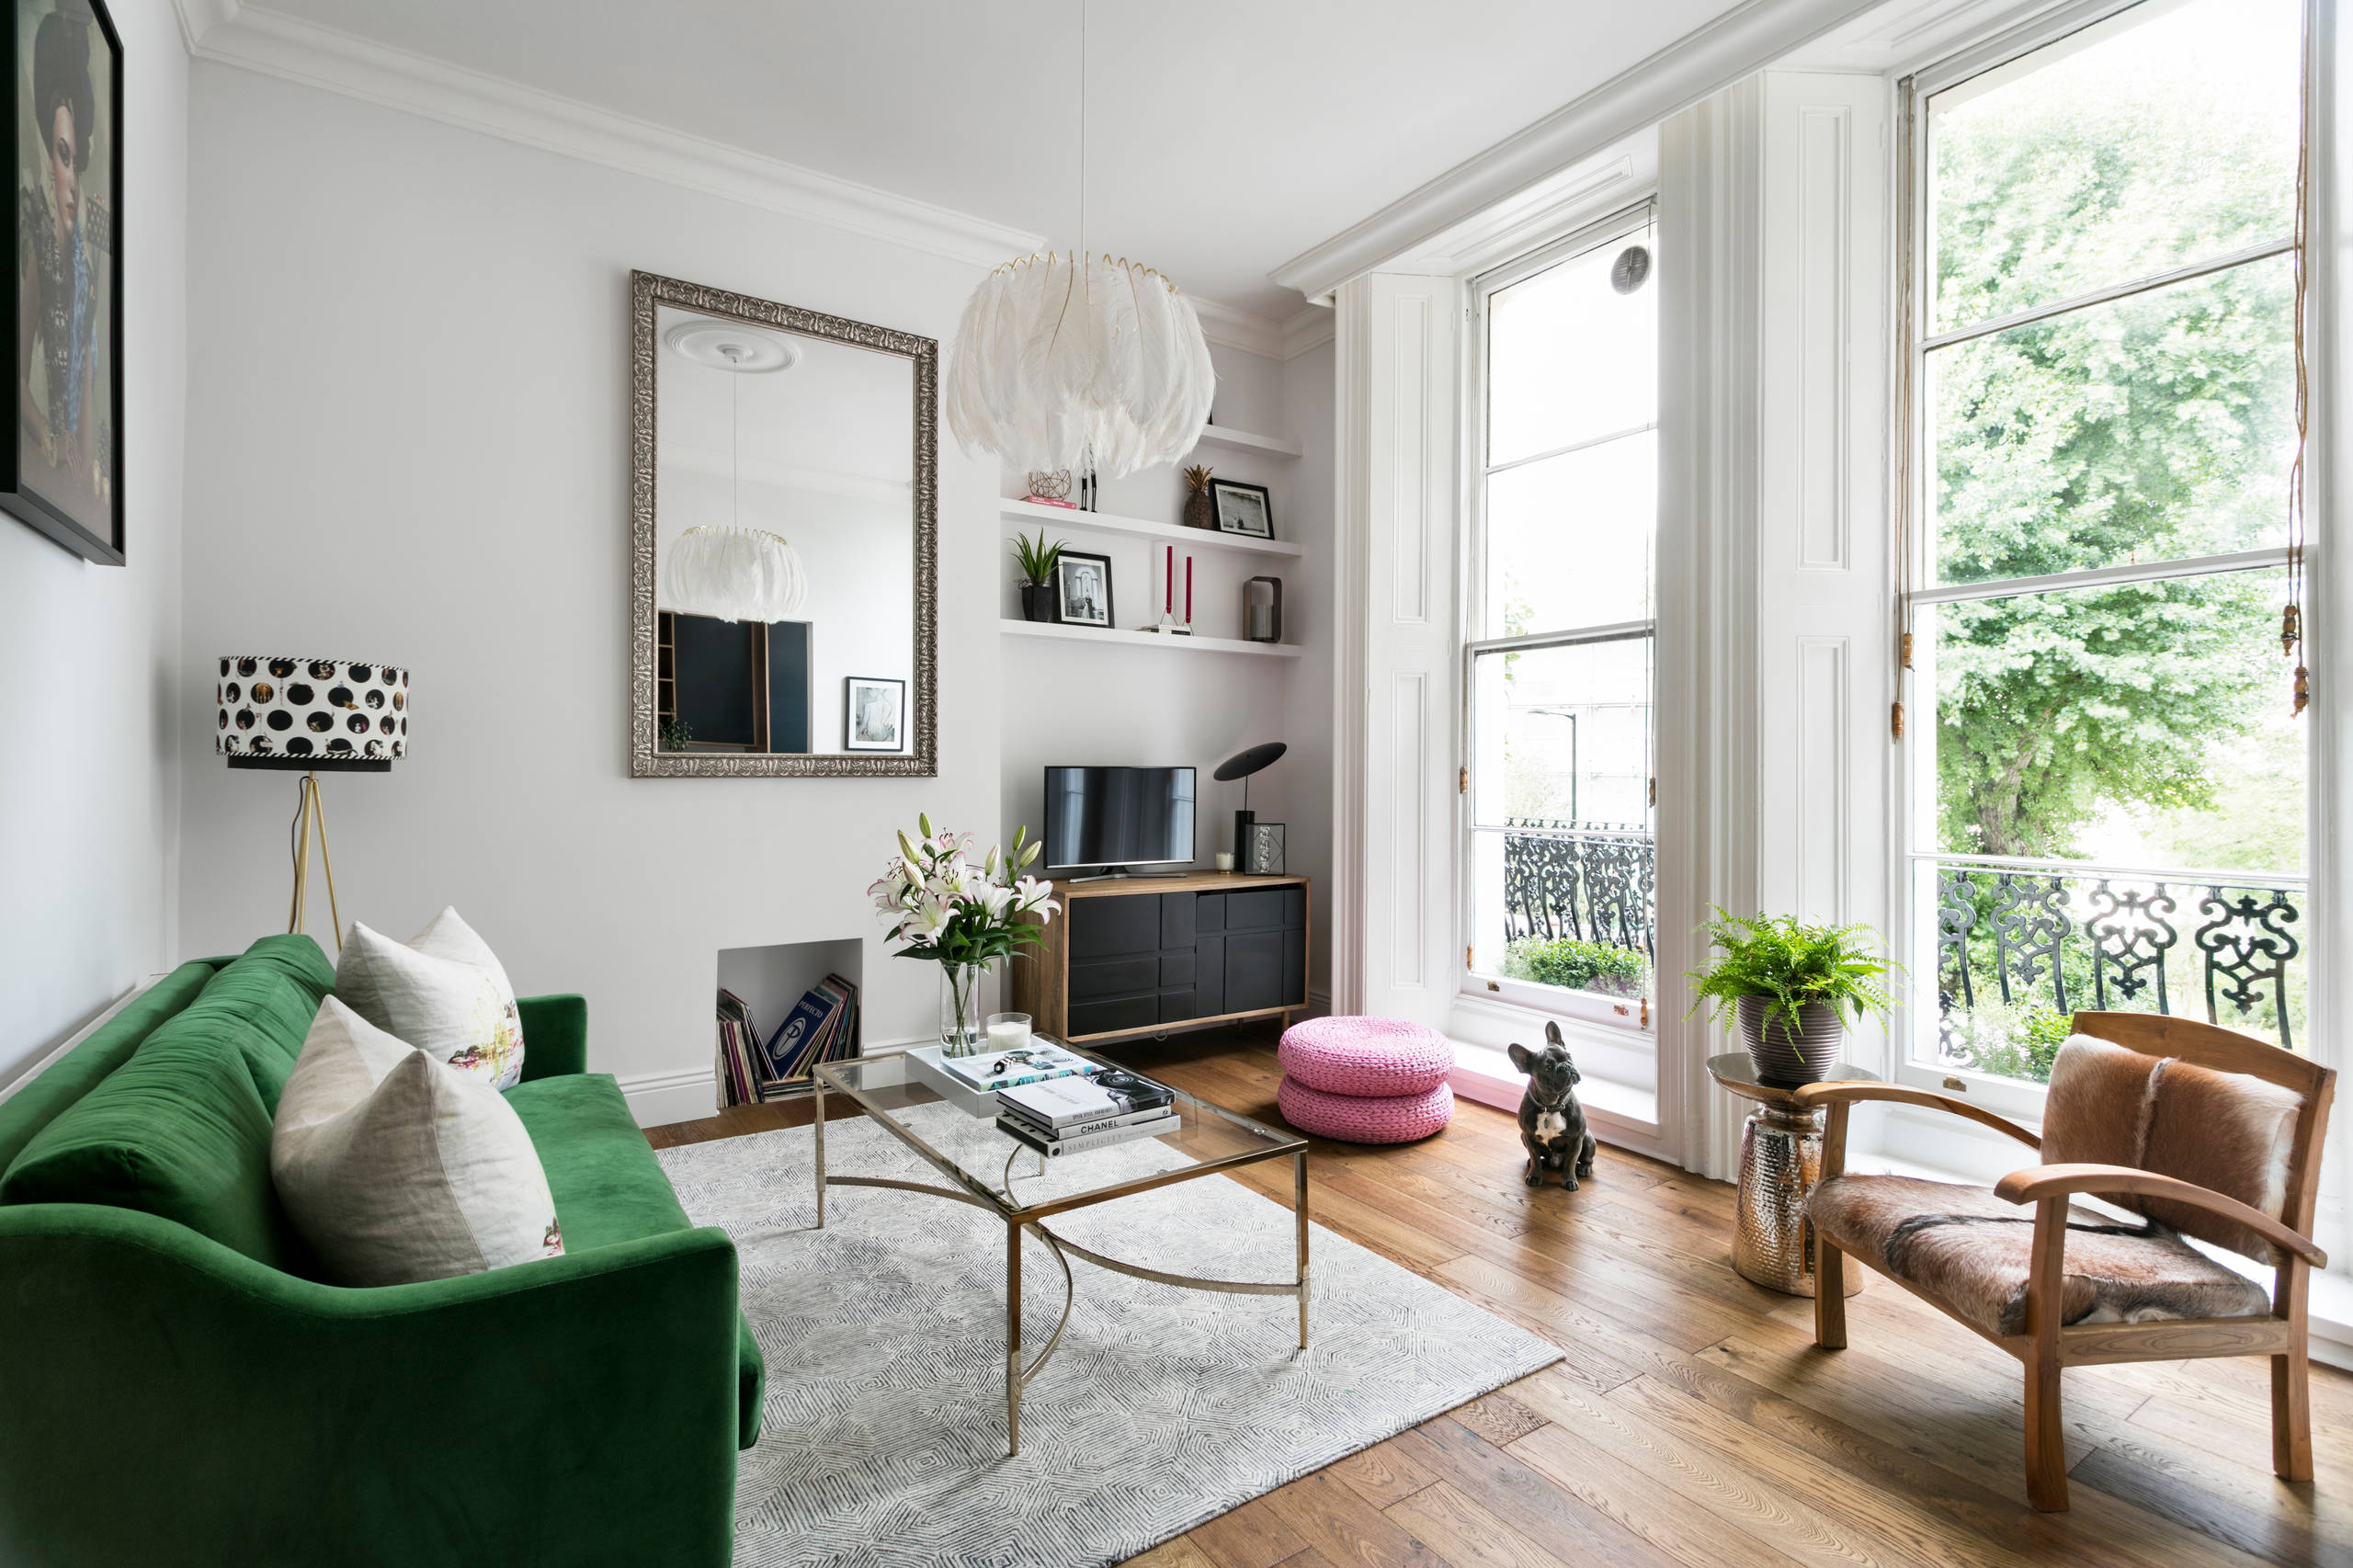 Decorating Tips and Paint Colours For a North-facing Room? | Houzz UK